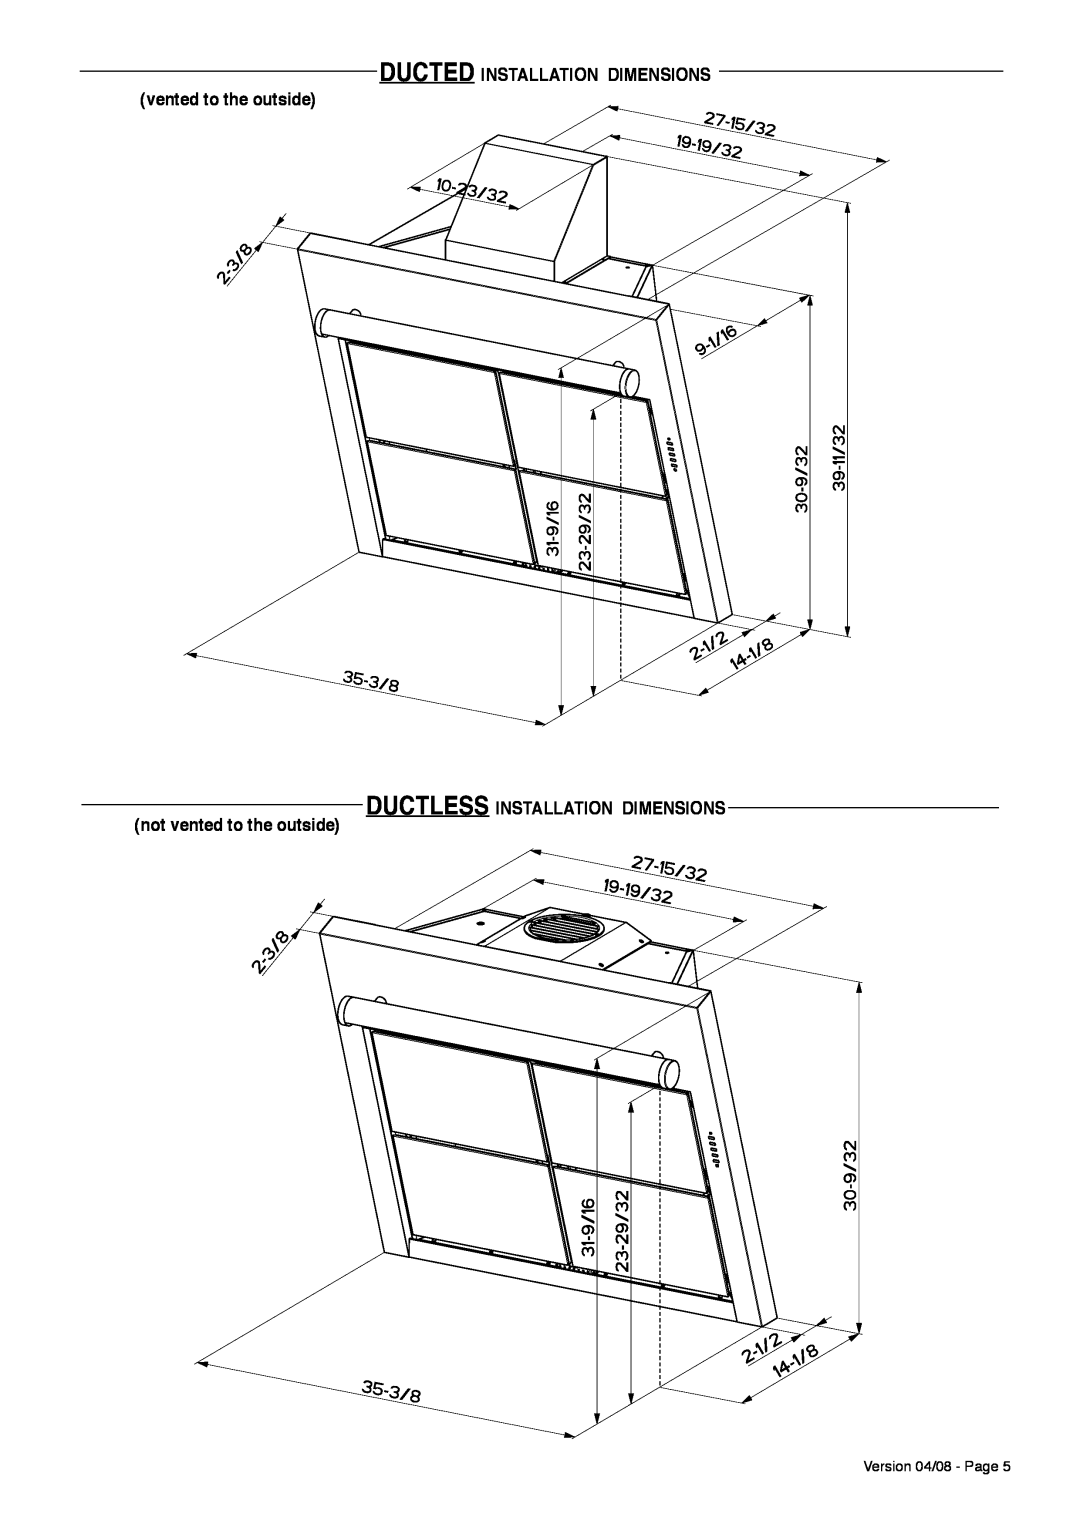 Faber Wall Mount Luxury Rangehood Ductedinstallation Dimensions, vented to the outside, Version 04/08 - Page 